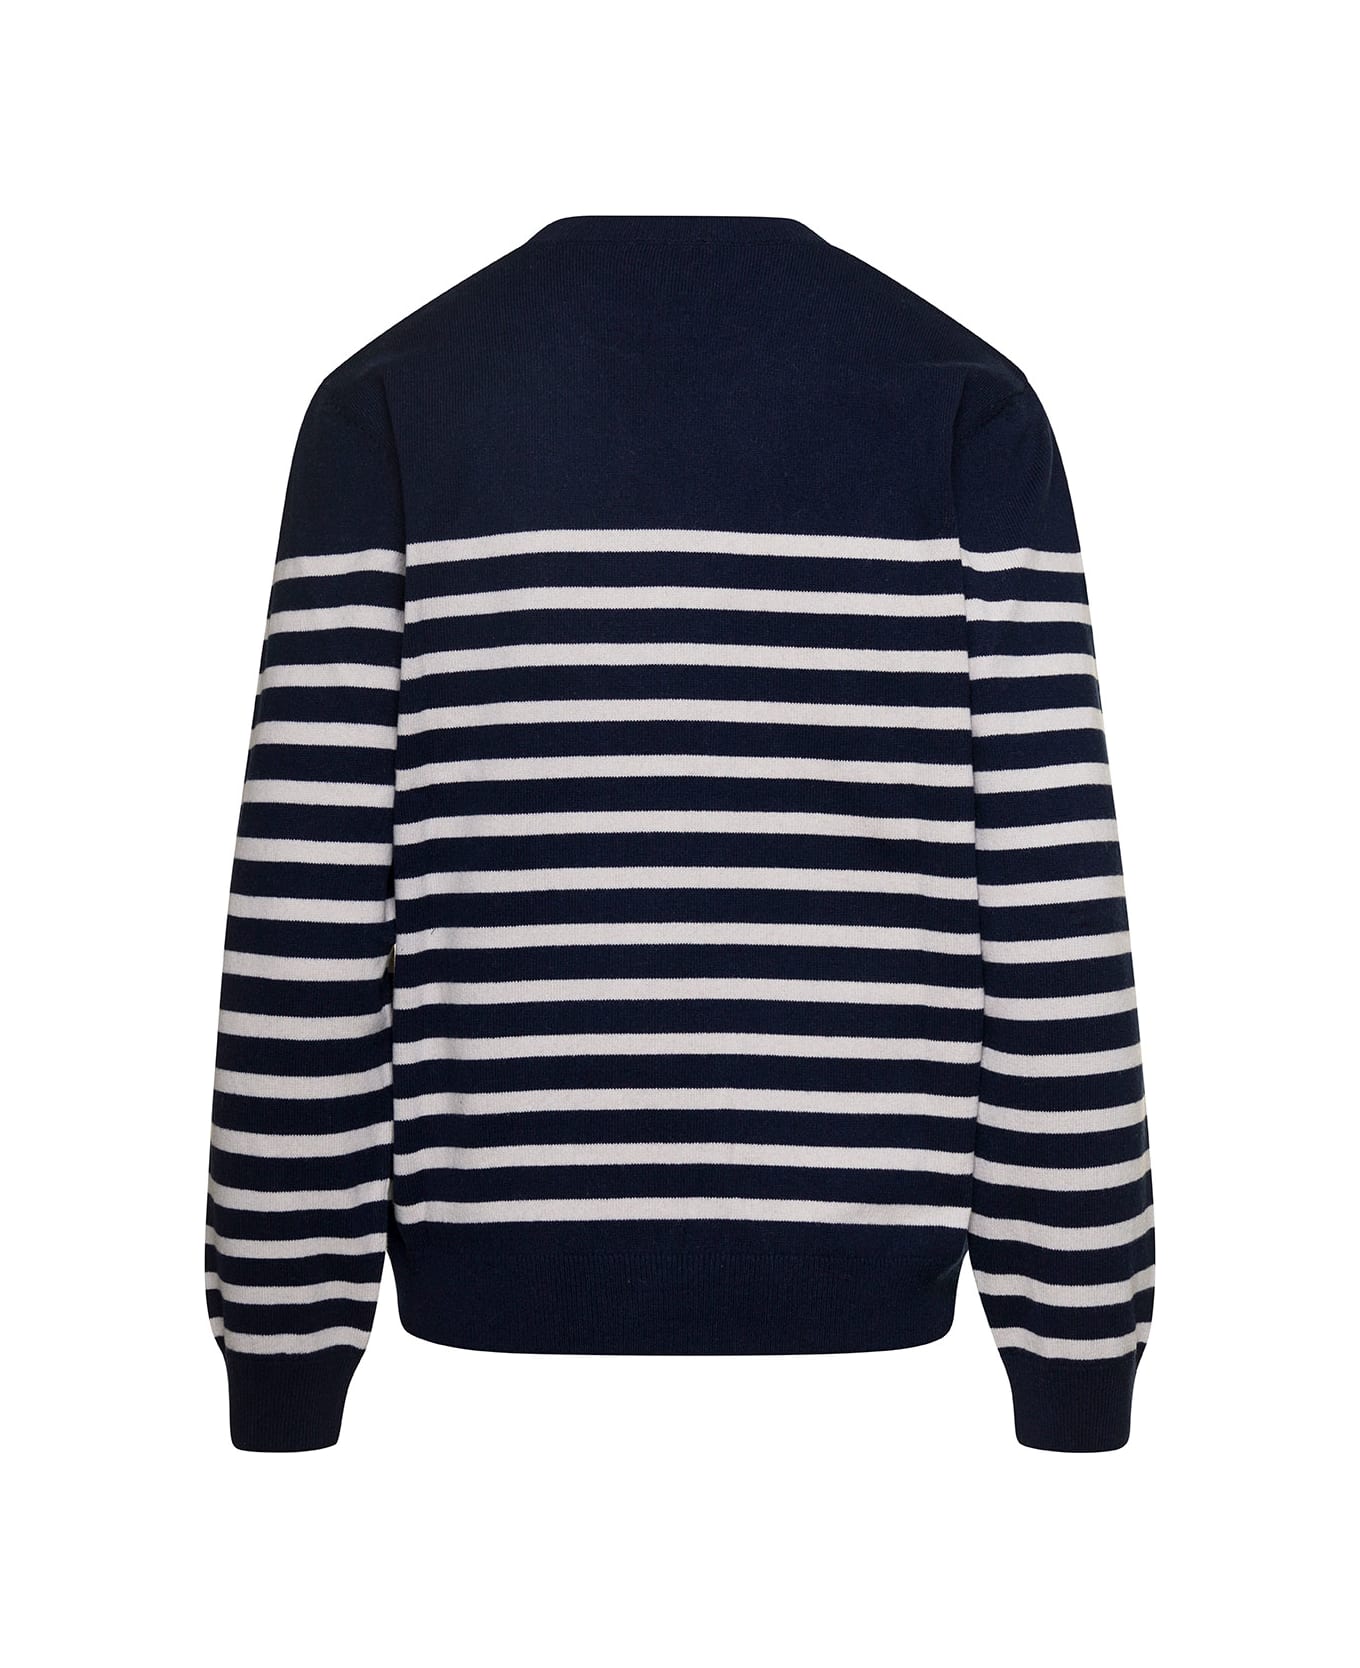 A.P.C. 'phoebe' Blue And White Crewneck Sweater With Striped Motif In Cotton And Cashmere Woman - Blu